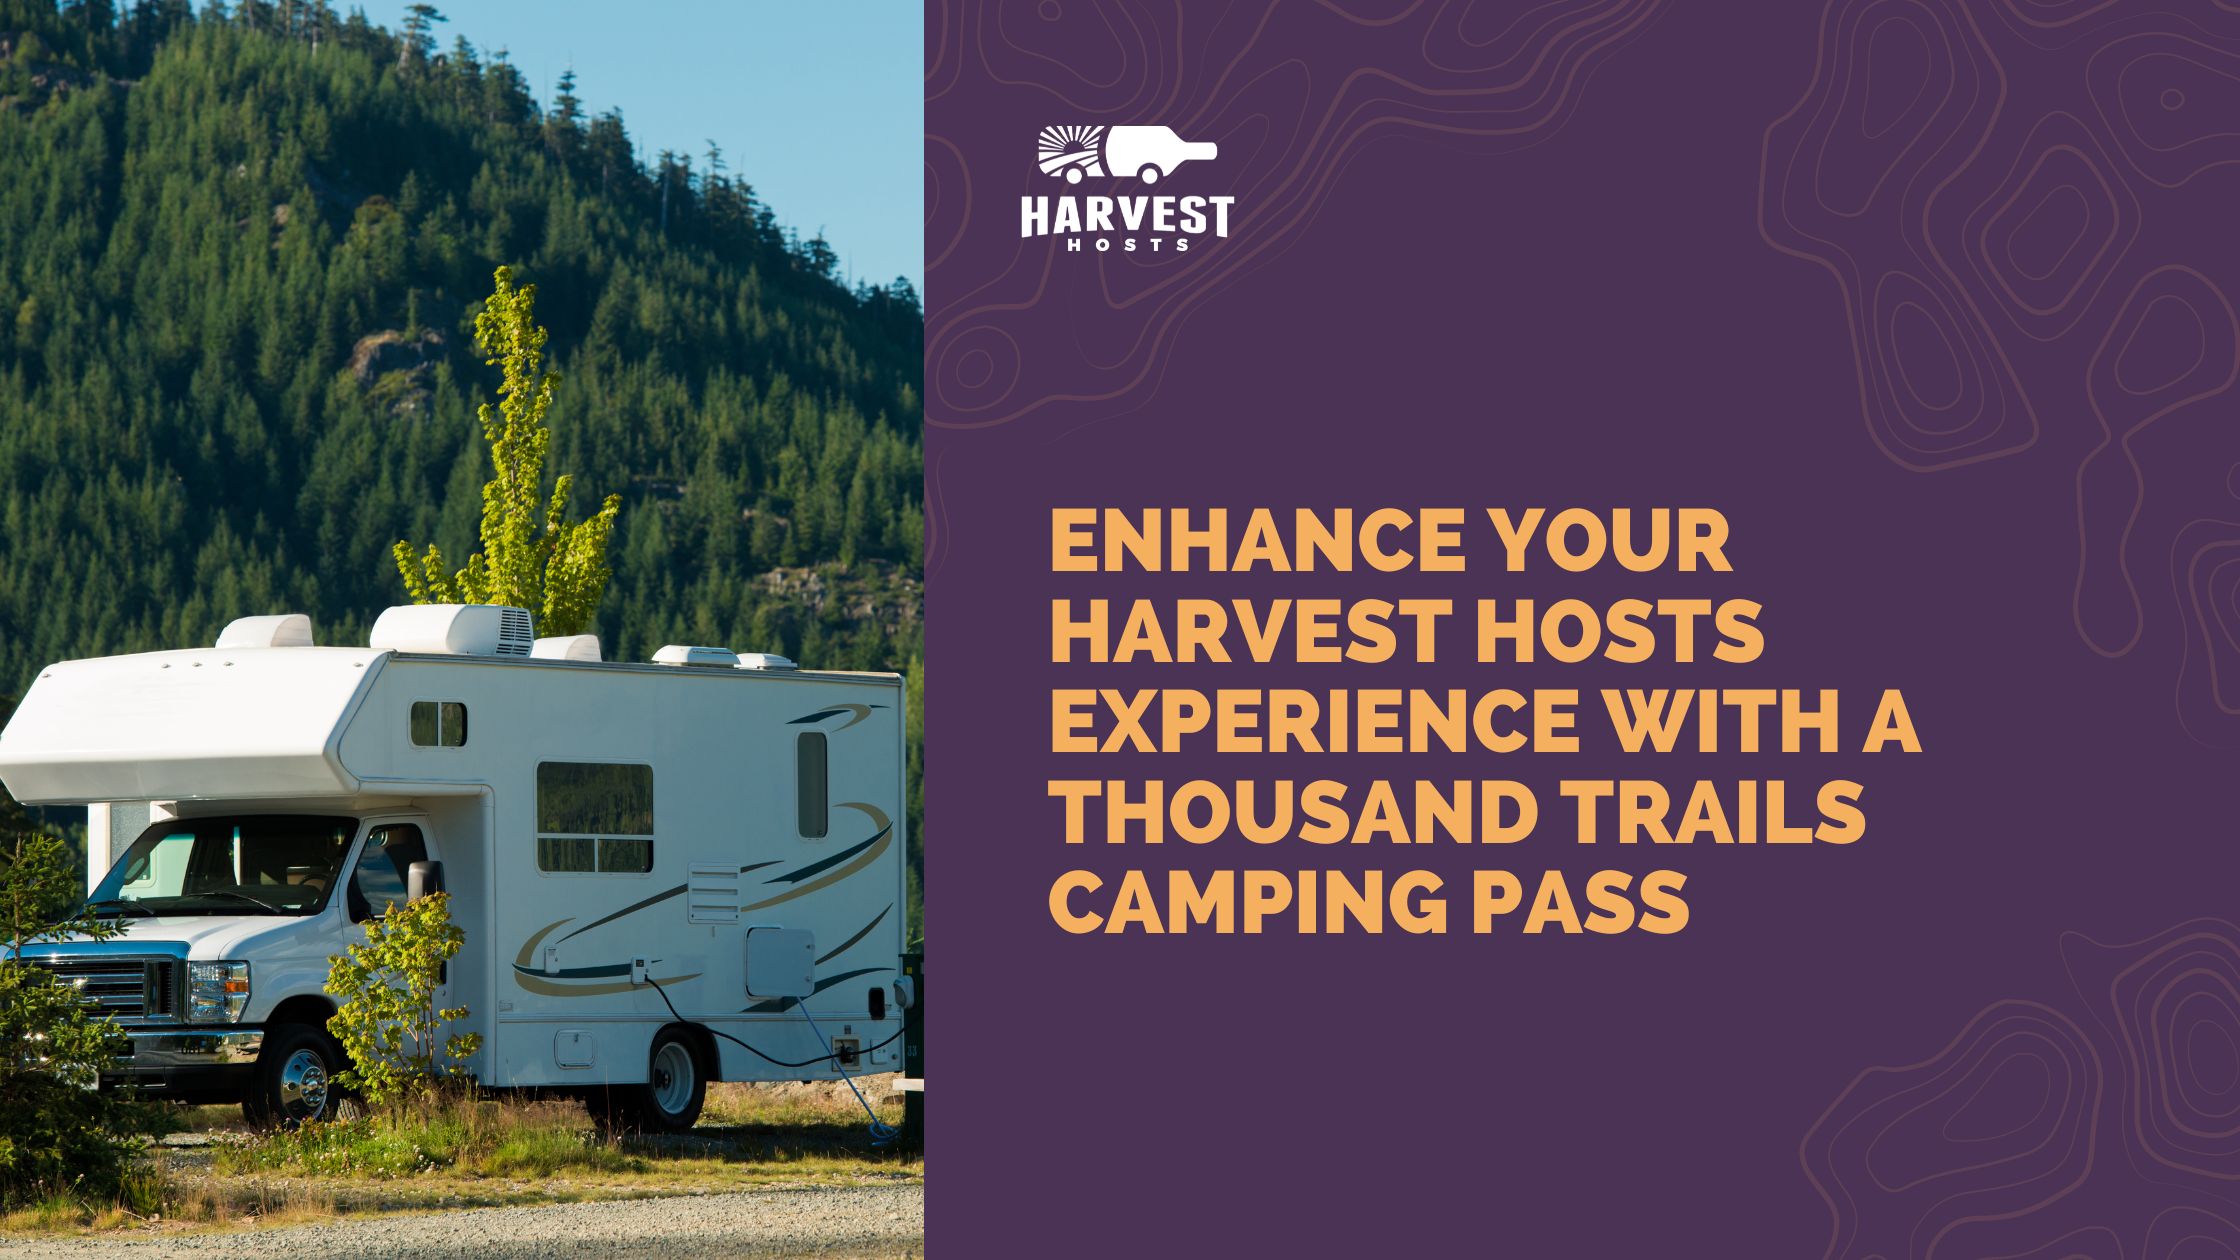 Enhance your Harvest Hosts Experience with a Thousand Trails Annual Camping Pass